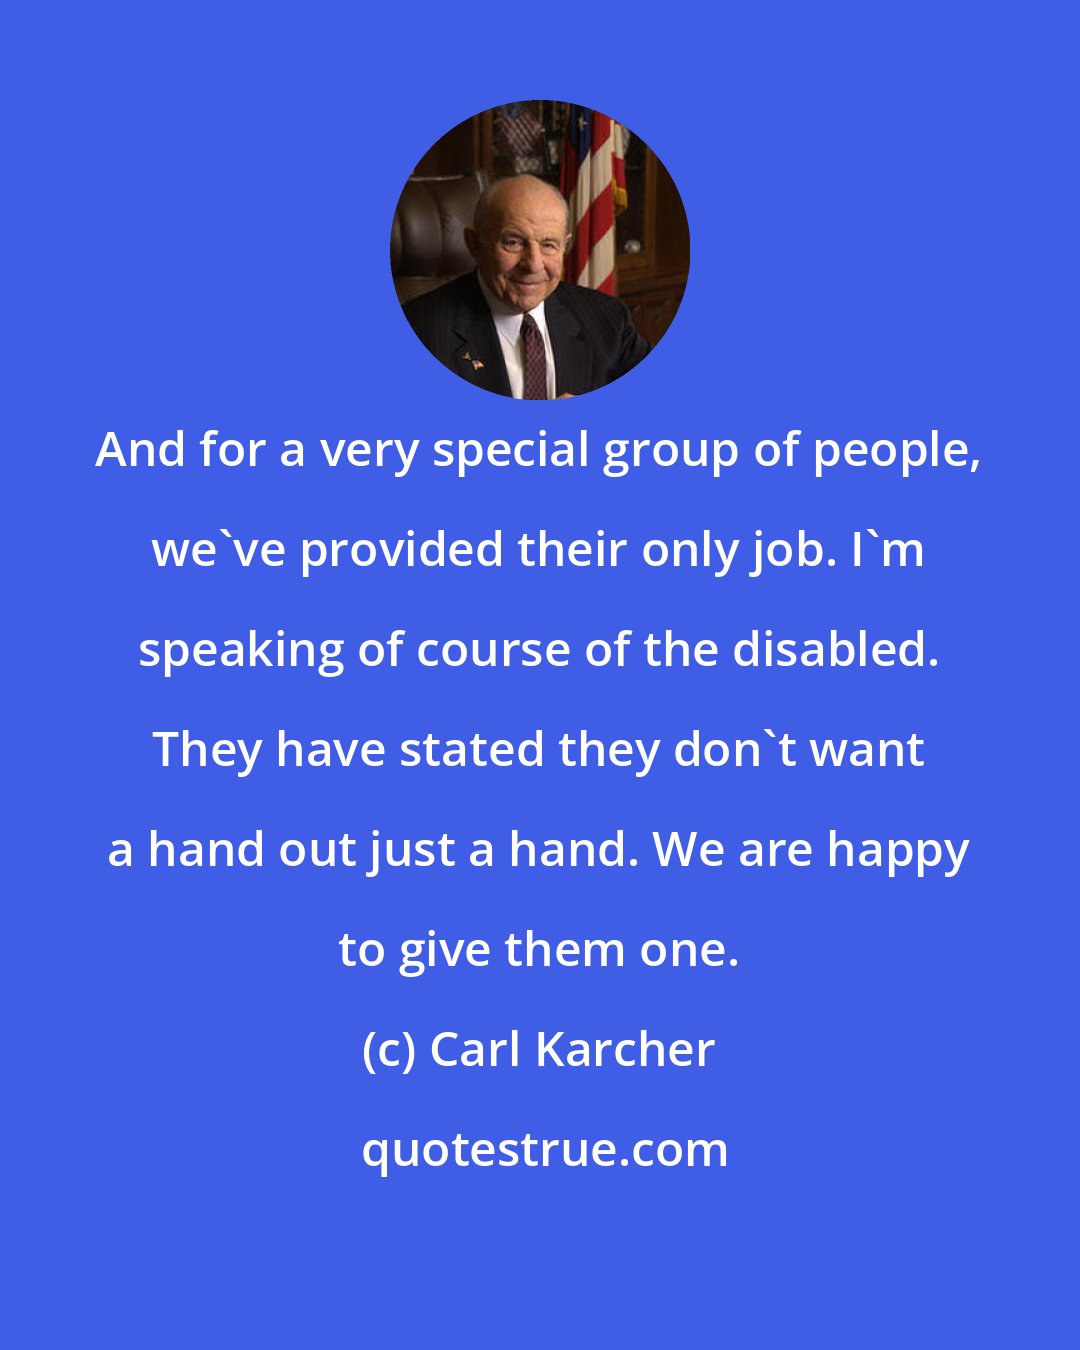 Carl Karcher: And for a very special group of people, we've provided their only job. I'm speaking of course of the disabled. They have stated they don't want a hand out just a hand. We are happy to give them one.